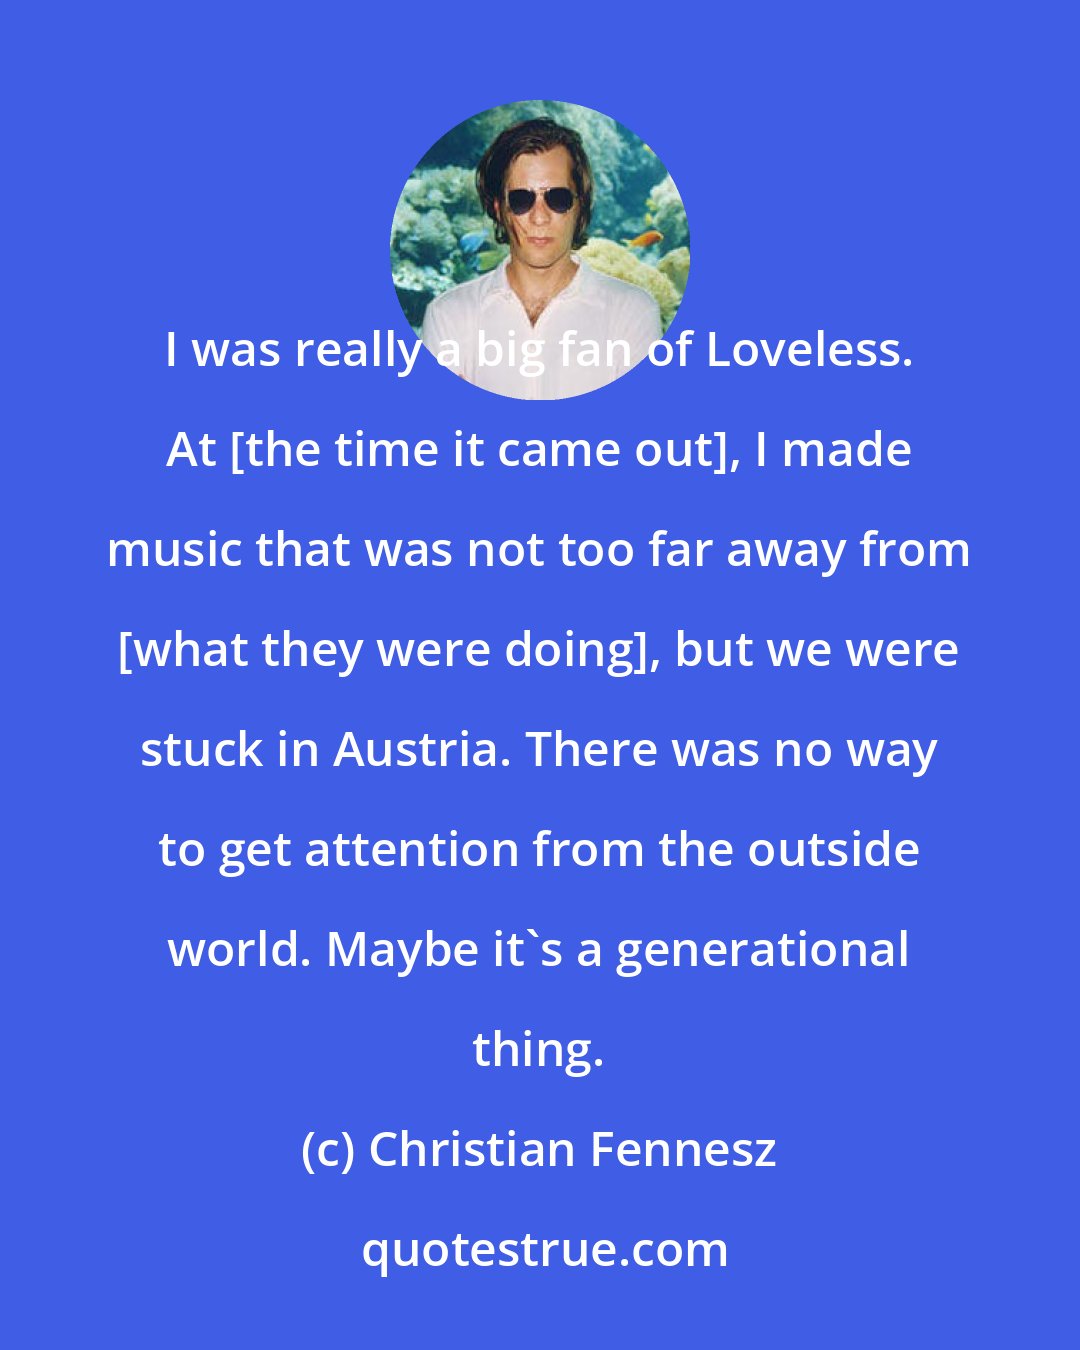 Christian Fennesz: I was really a big fan of Loveless. At [the time it came out], I made music that was not too far away from [what they were doing], but we were stuck in Austria. There was no way to get attention from the outside world. Maybe it's a generational thing.